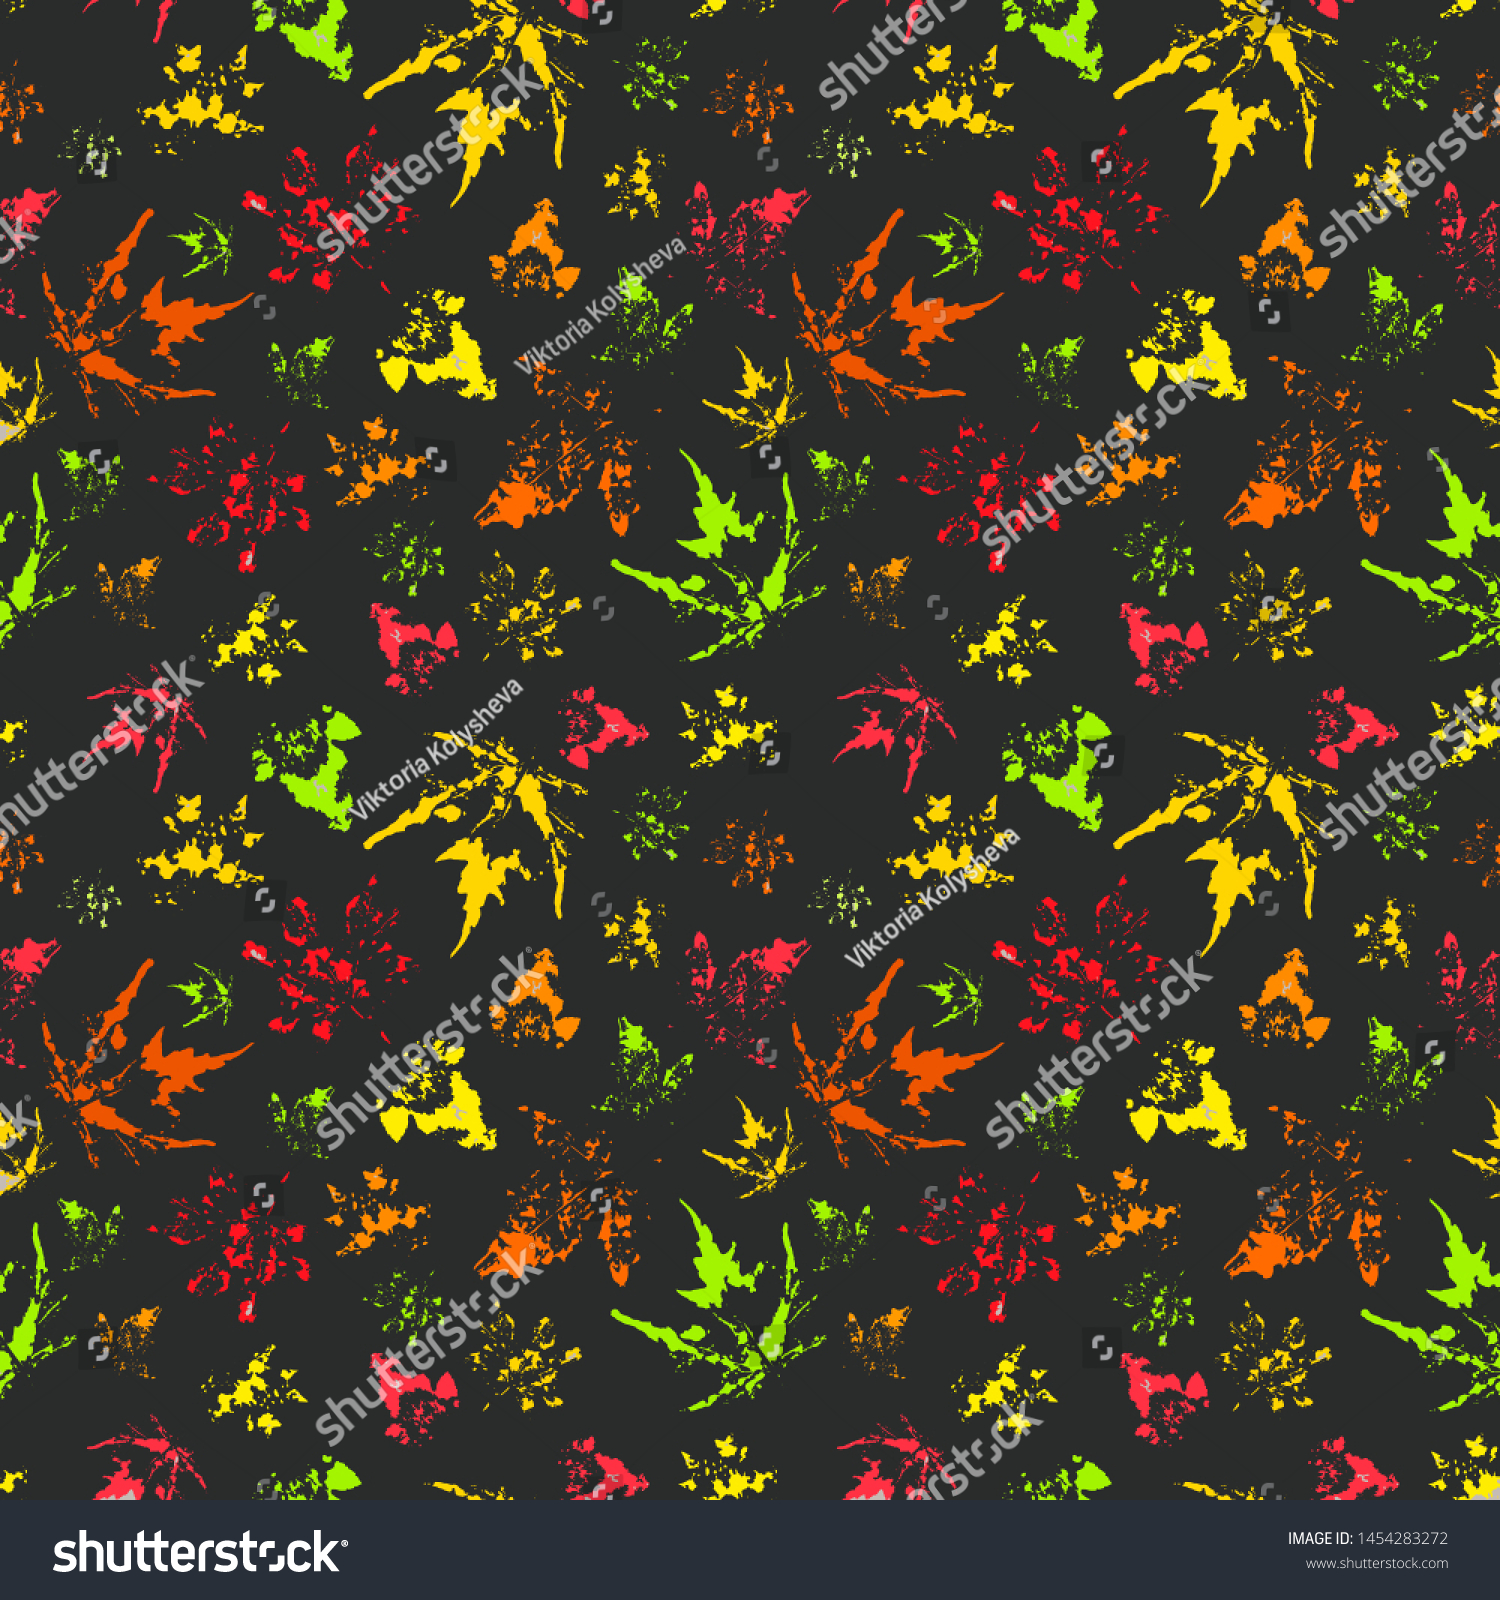 Seamless pattern of autumn leaves on dark green background, isolated on white background #1454283272